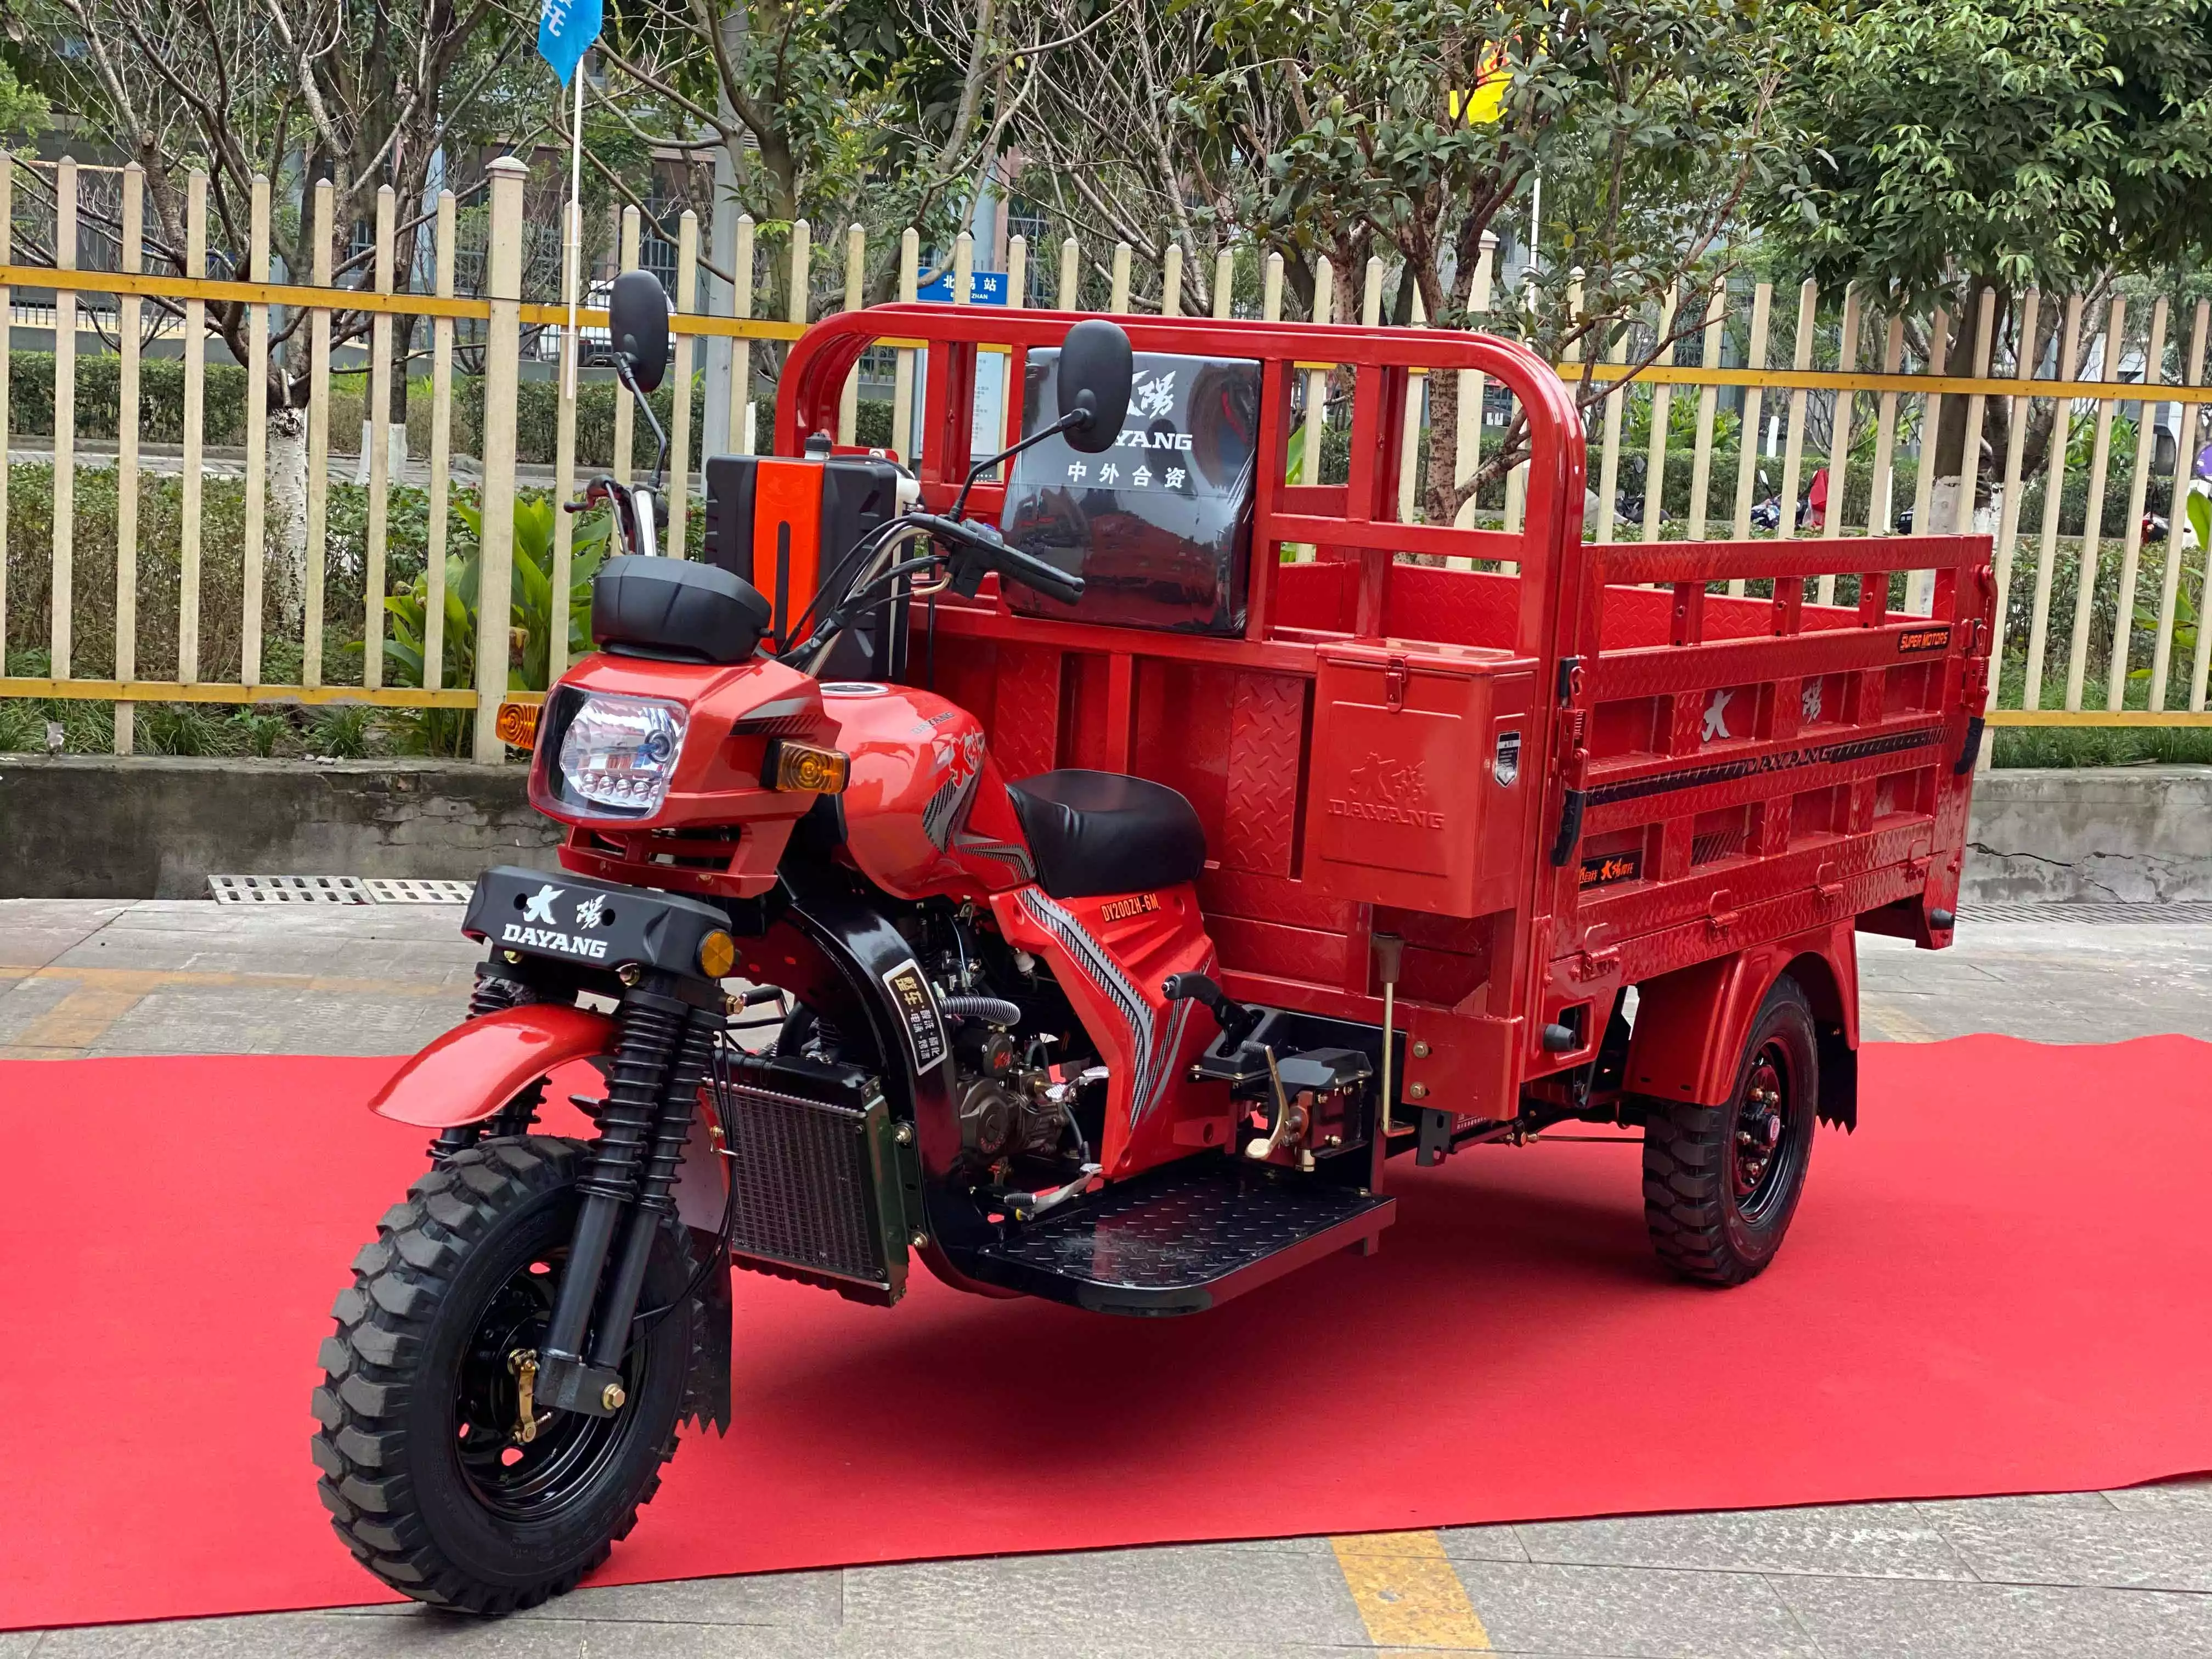 China DAYANG 3 wheels farm vehicle heavy duty loading motorcycles 20cc power engine tricycle red body box packing color brake